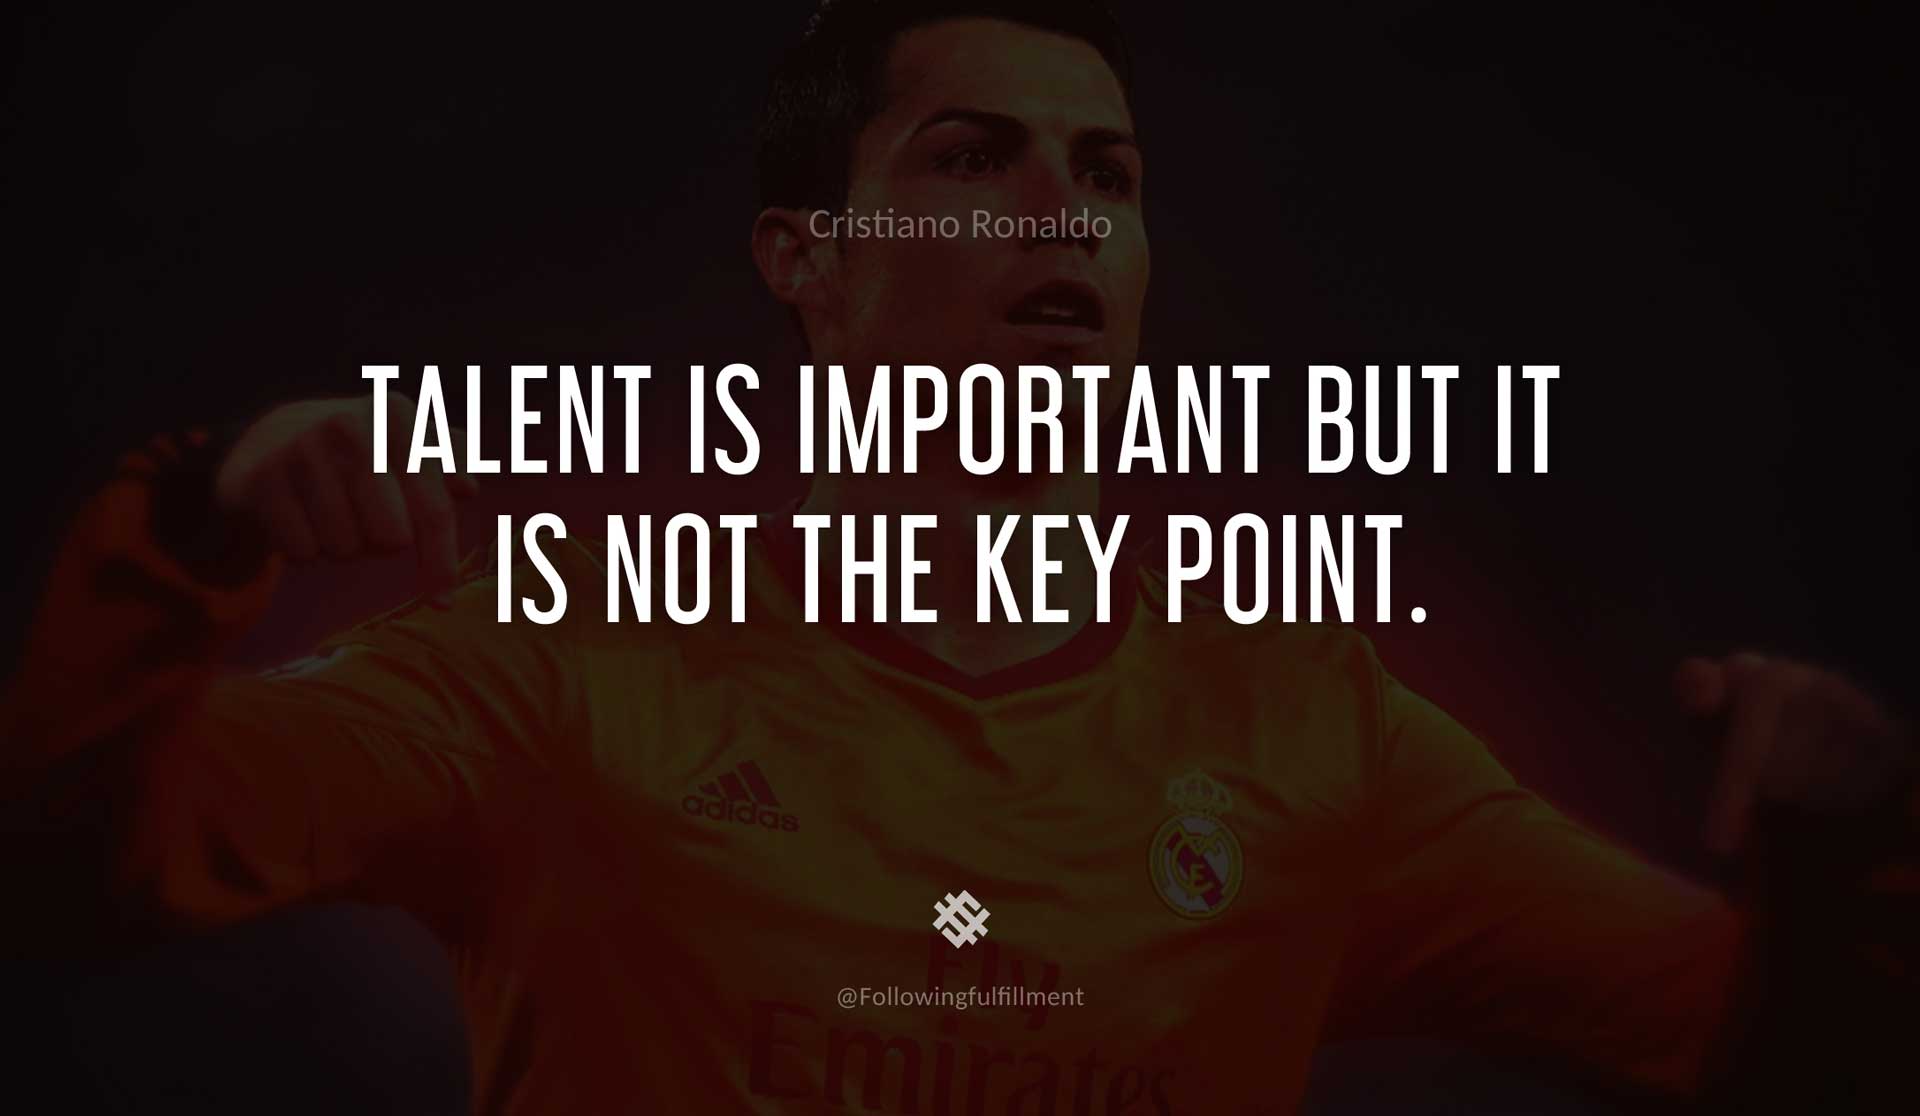 Talent-is-important-but-it-is-not-the-key-point.-CRISTIANO-RONALDO-Quote.jpg